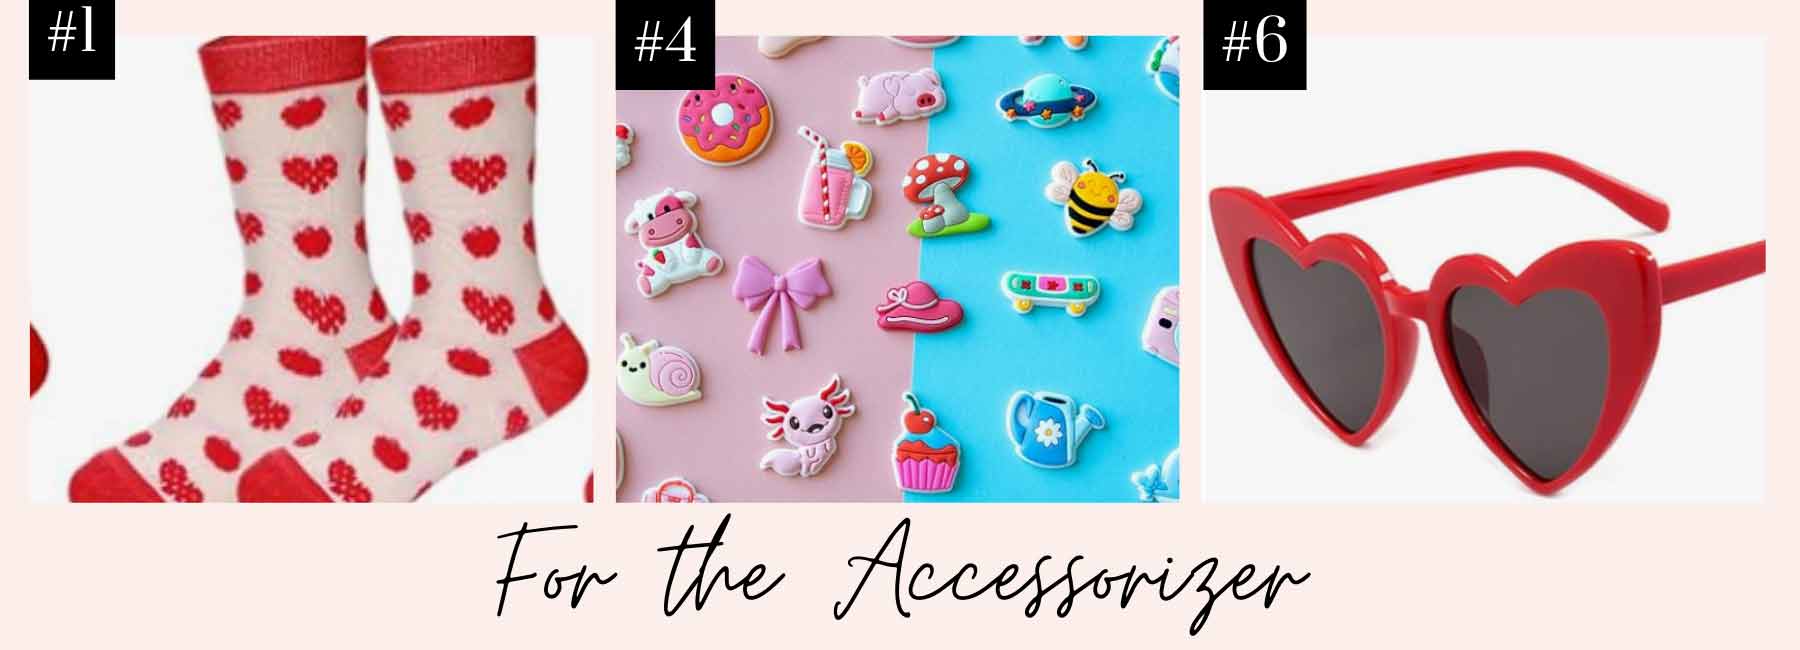 Valentines gift ideas for the accessorizer